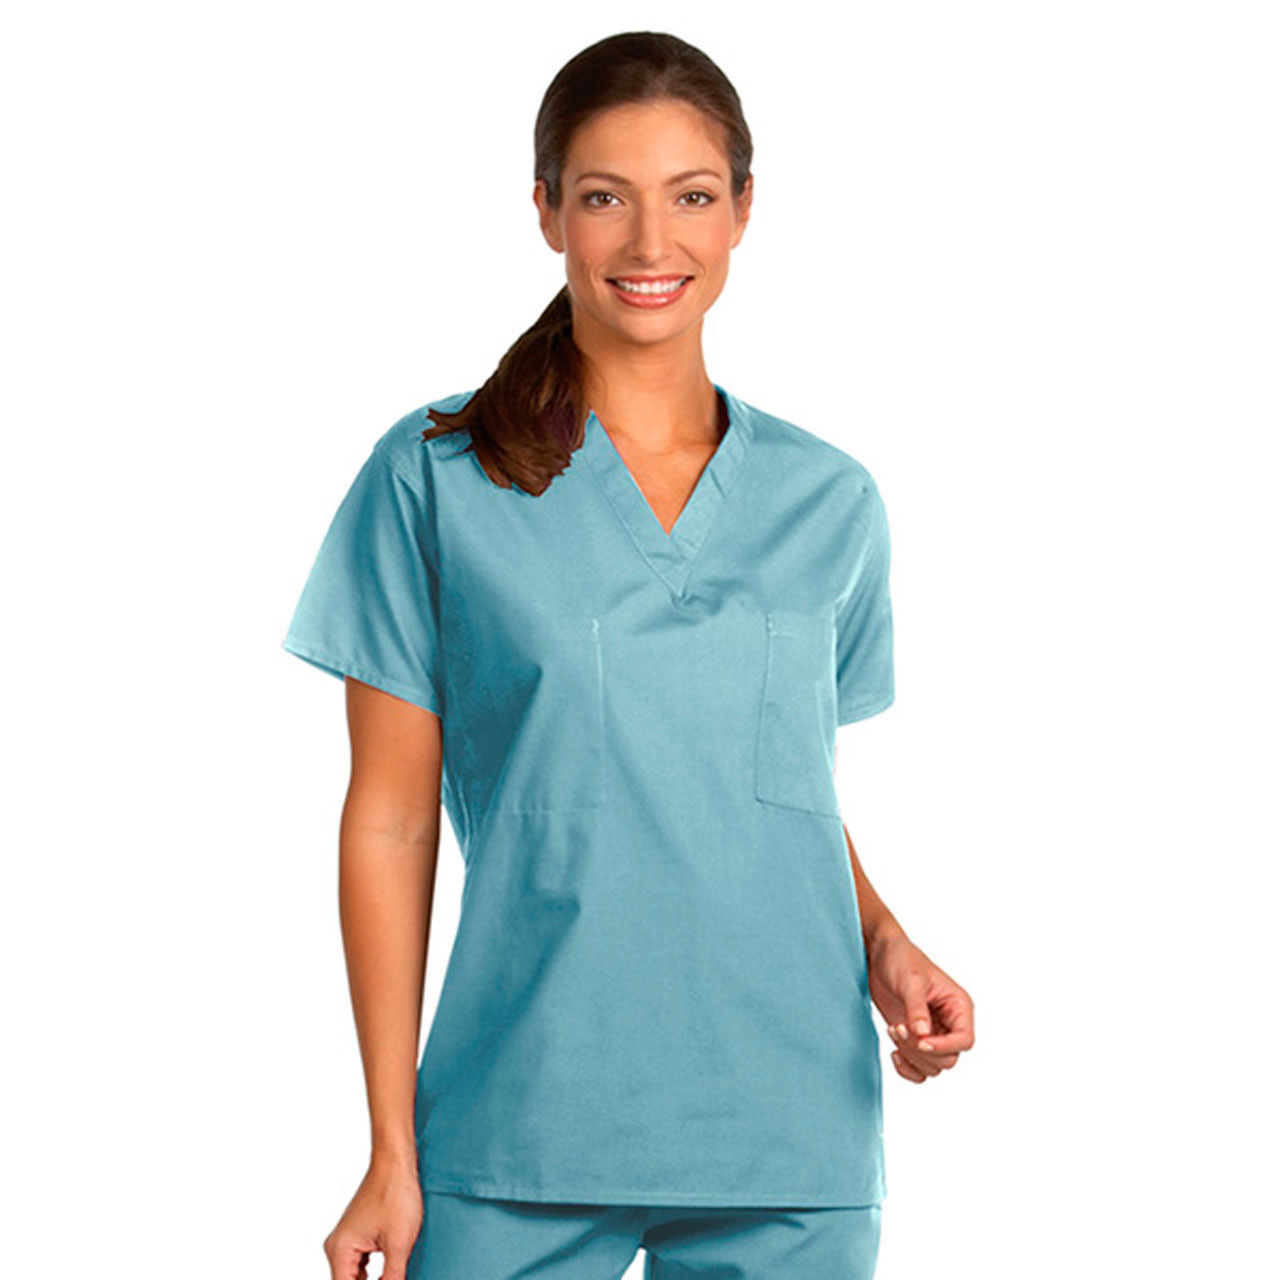 How versatile are the unisex surgical scrubs in the Misty Green bulk set of 12?